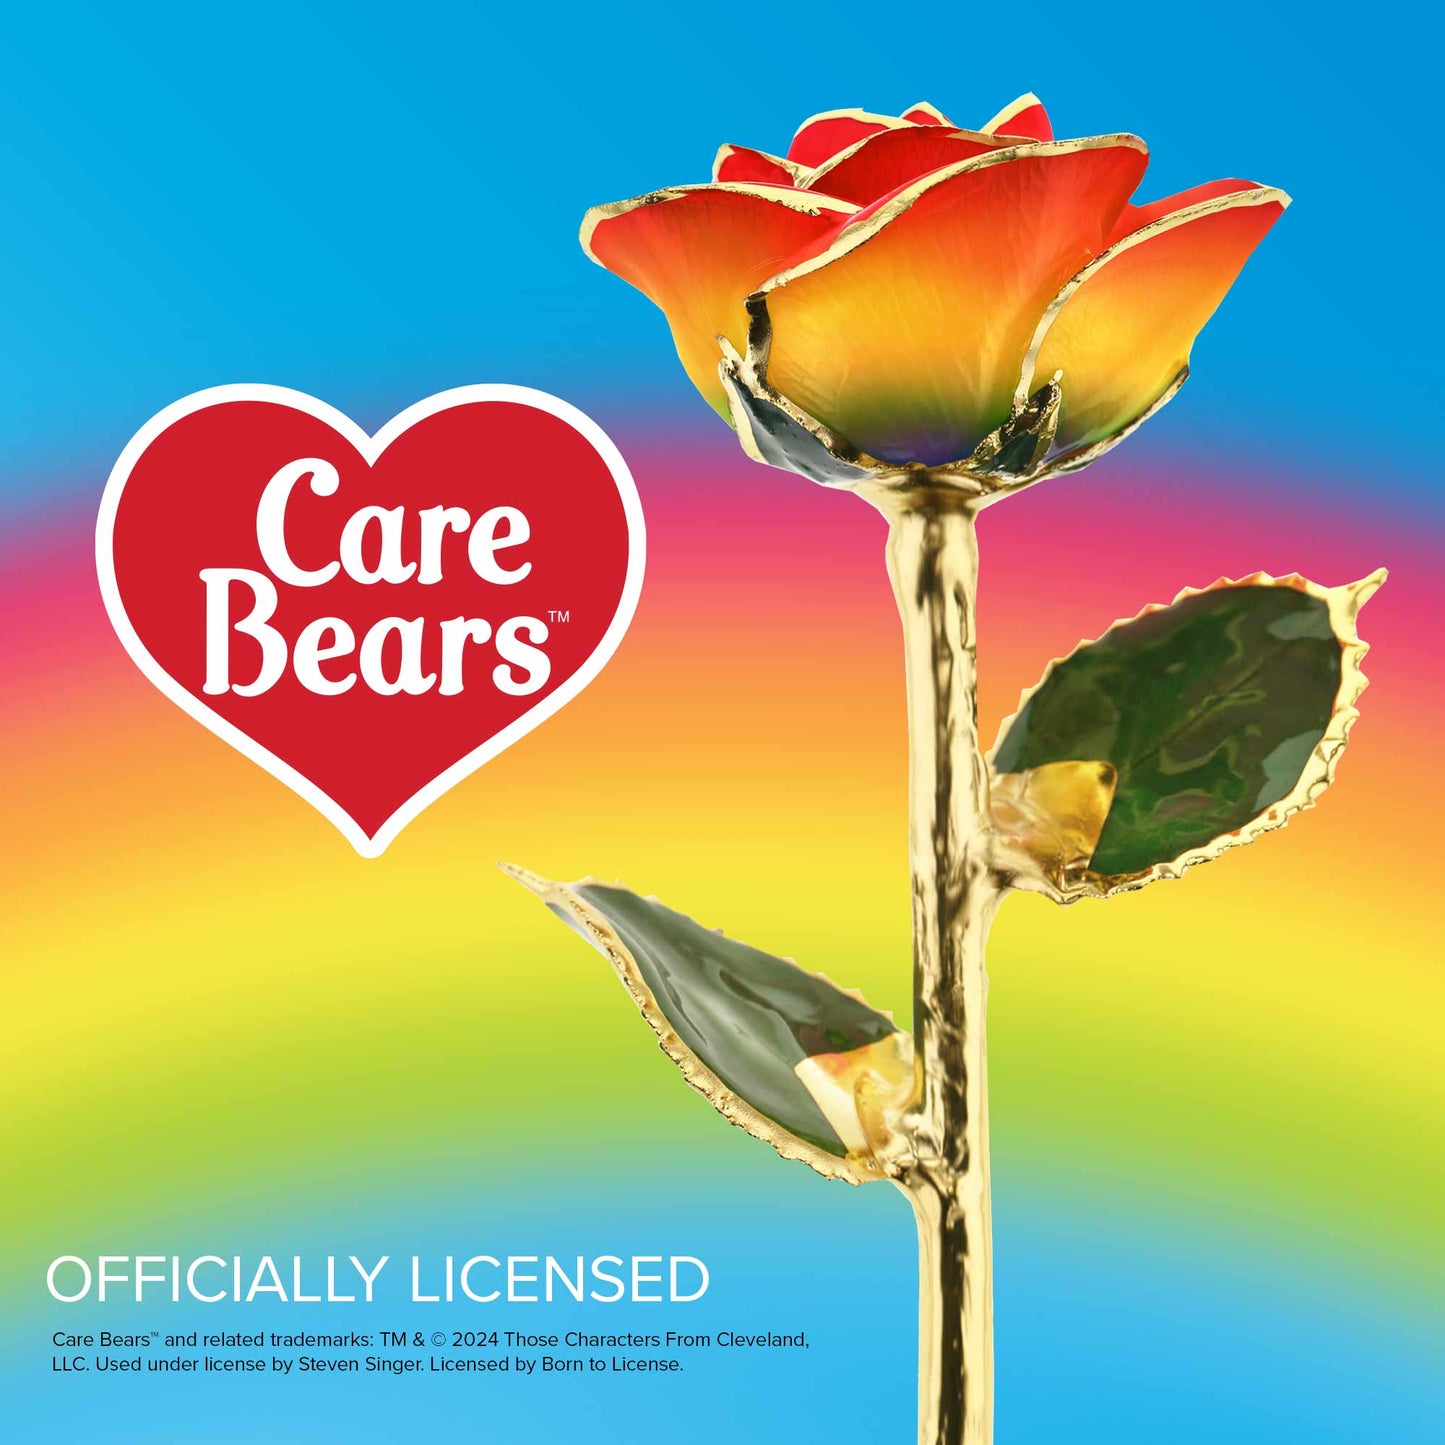 Care Bears Rainbow 24kt Gold Dipped Rose